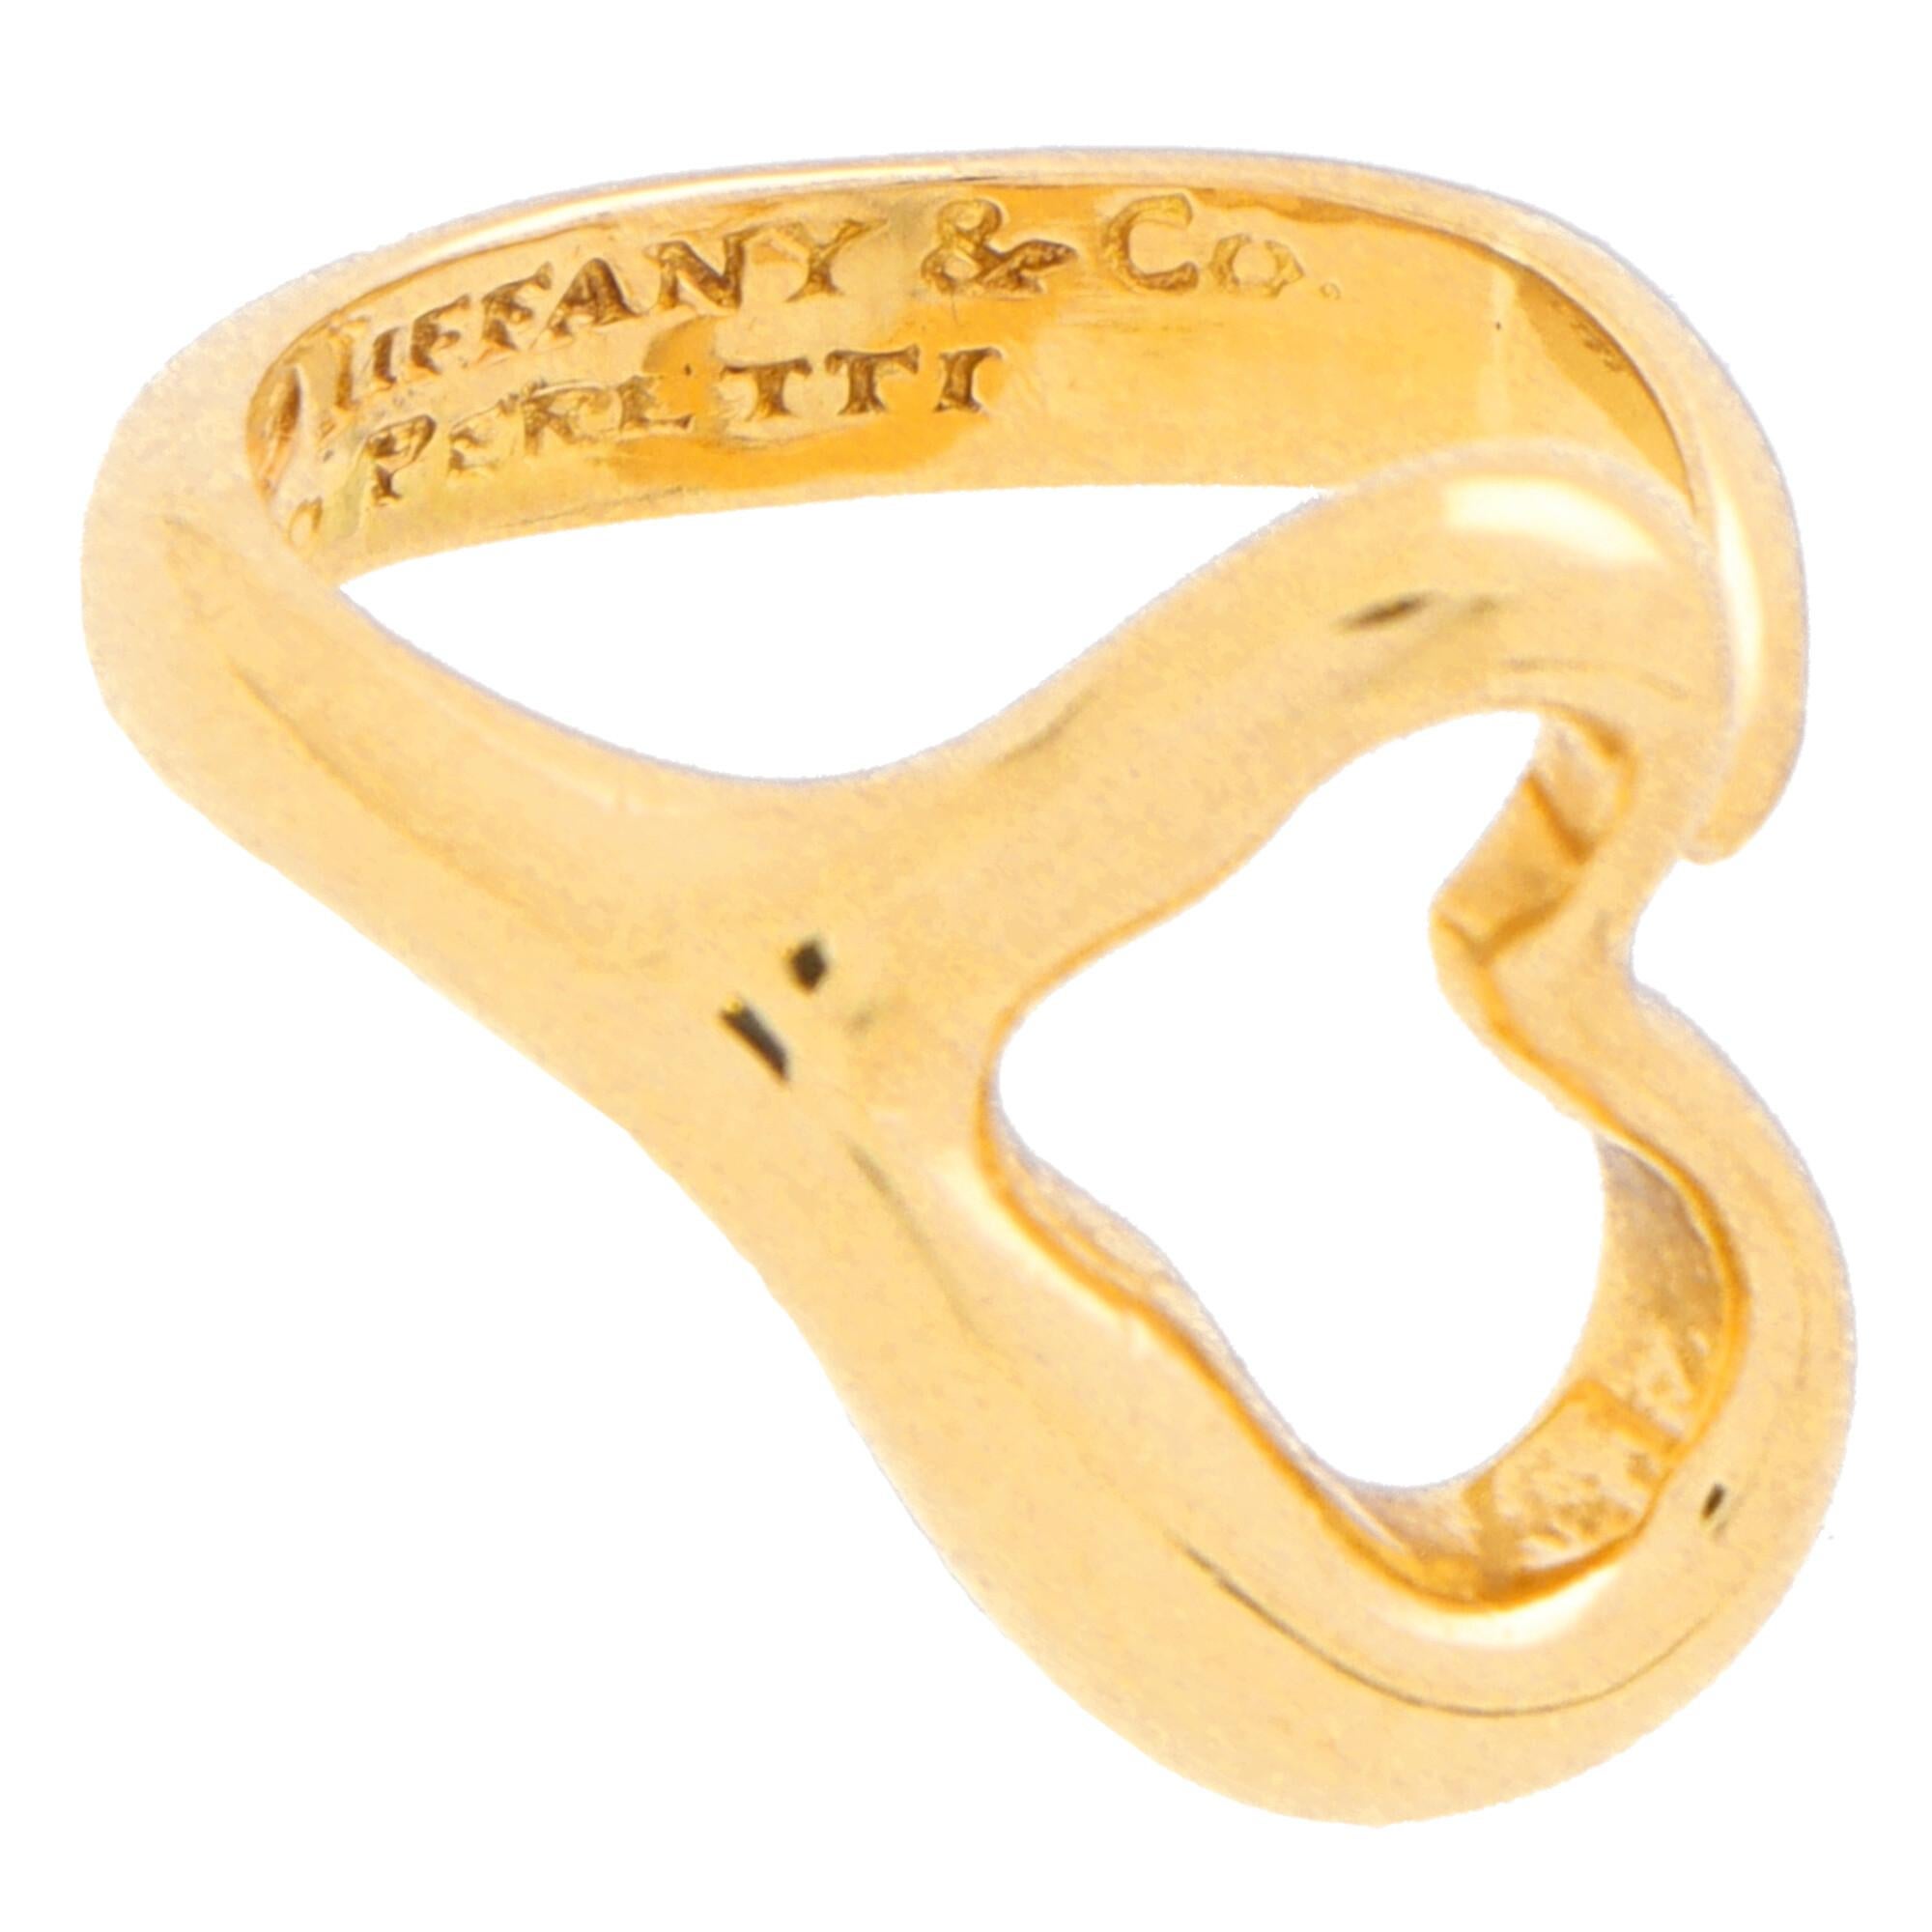 Vintage Tiffany & Co. Elsa Peretti Open Heart Ring in 18k Yellow Gold In Good Condition For Sale In London, GB